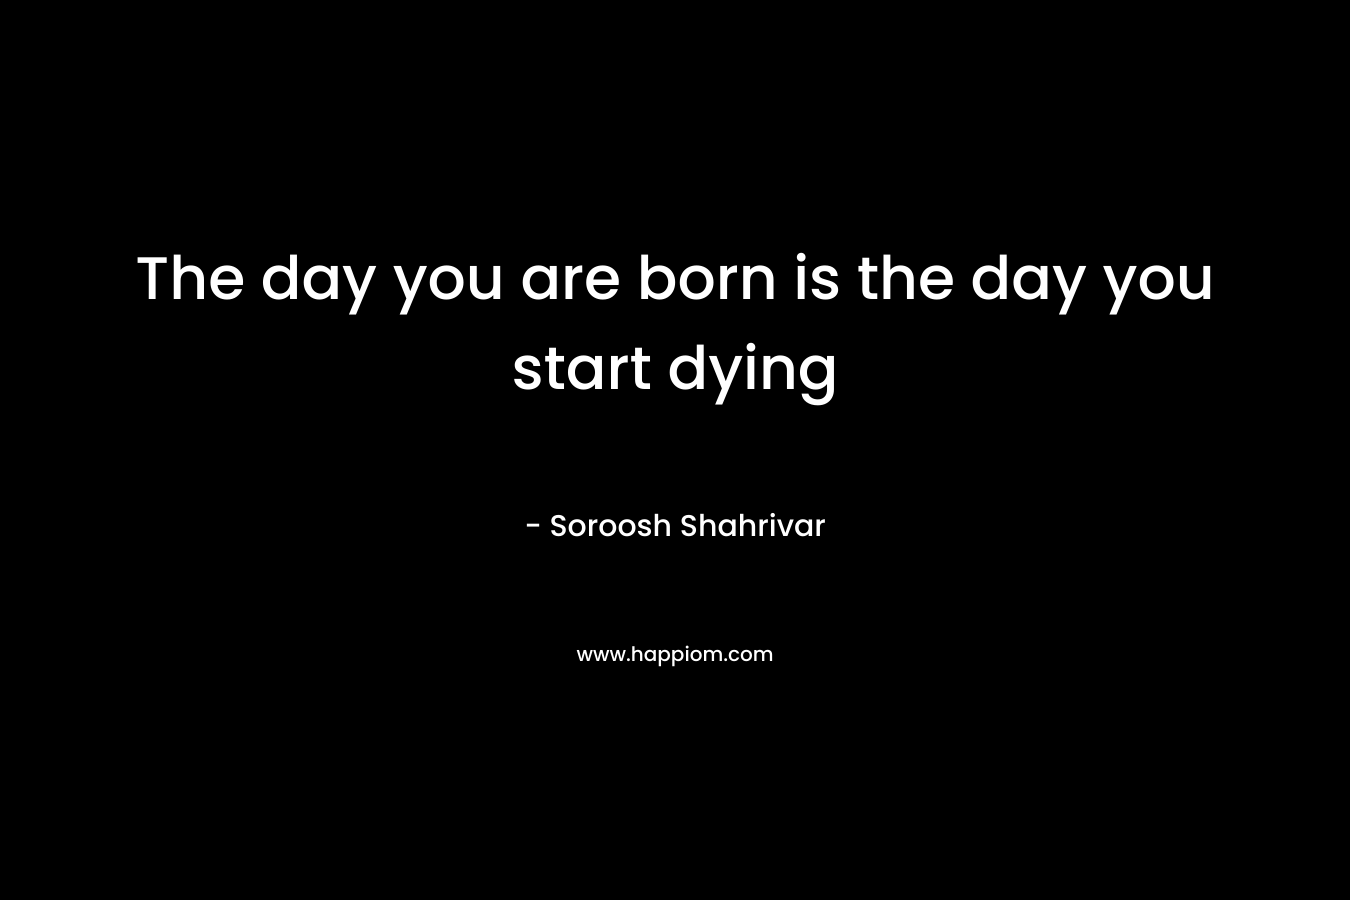 The day you are born is the day you start dying